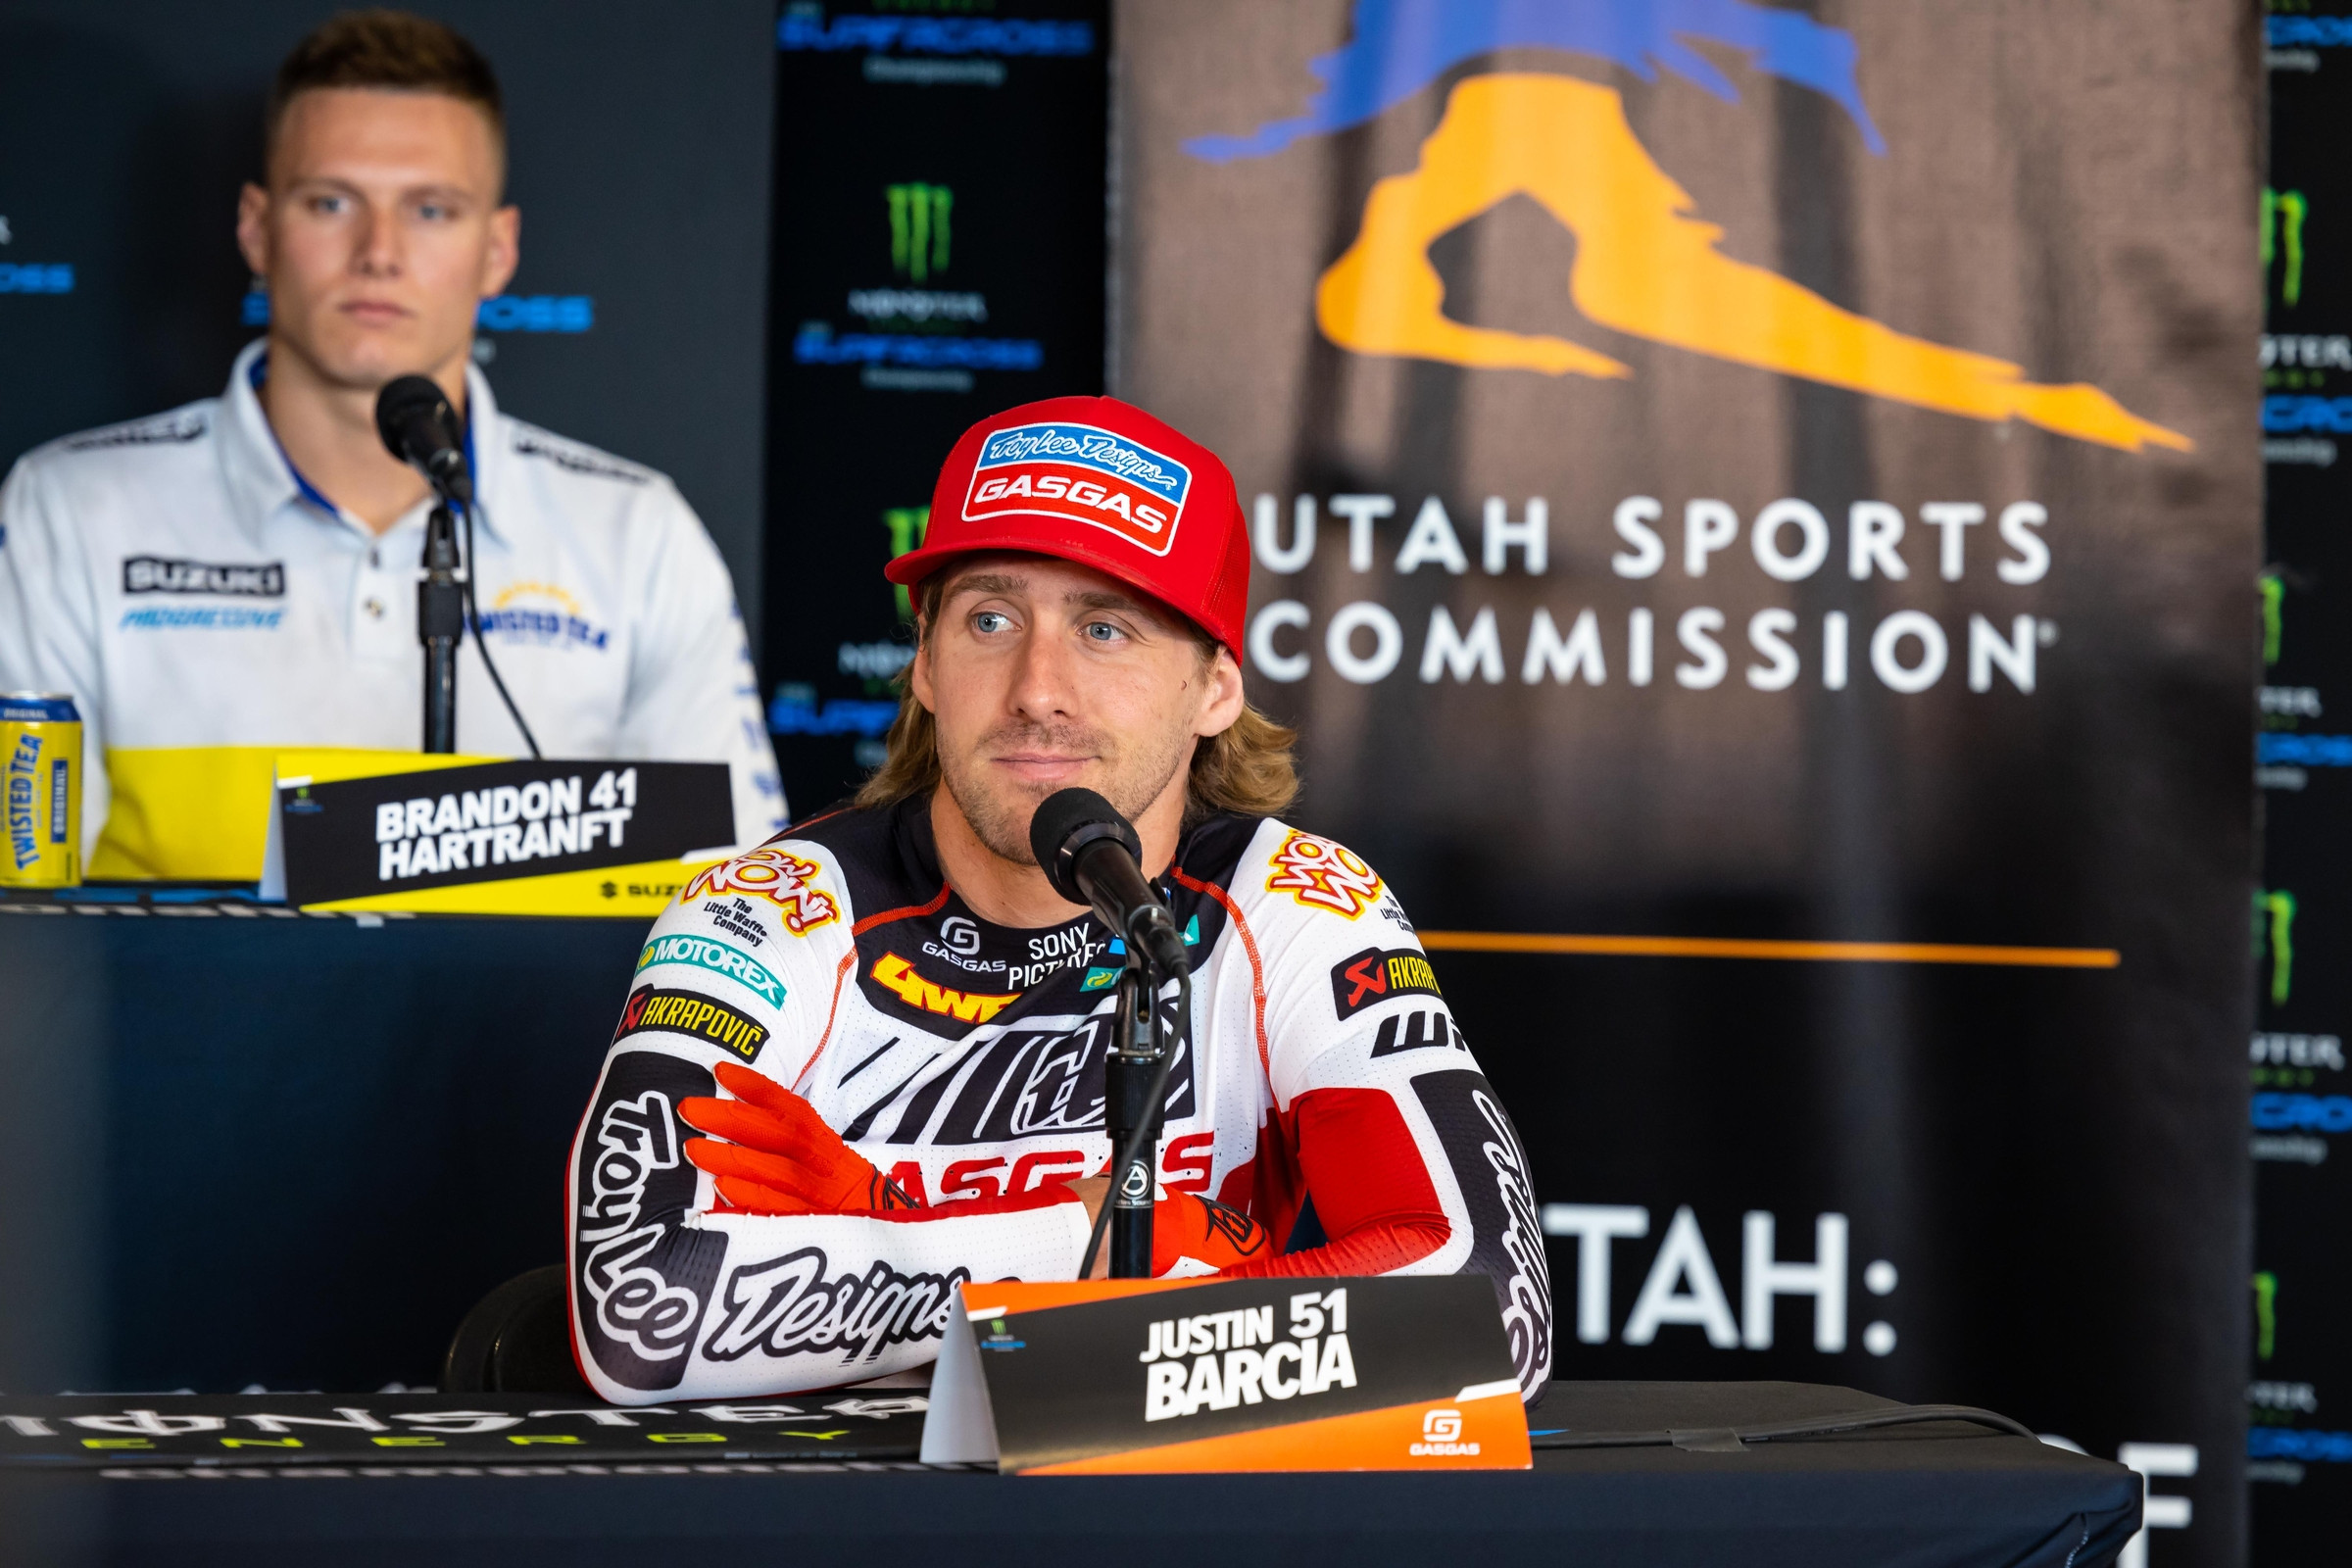 Barcia on His Takeout Move on Malcolm Stewart at Salt Lake City Supercross 